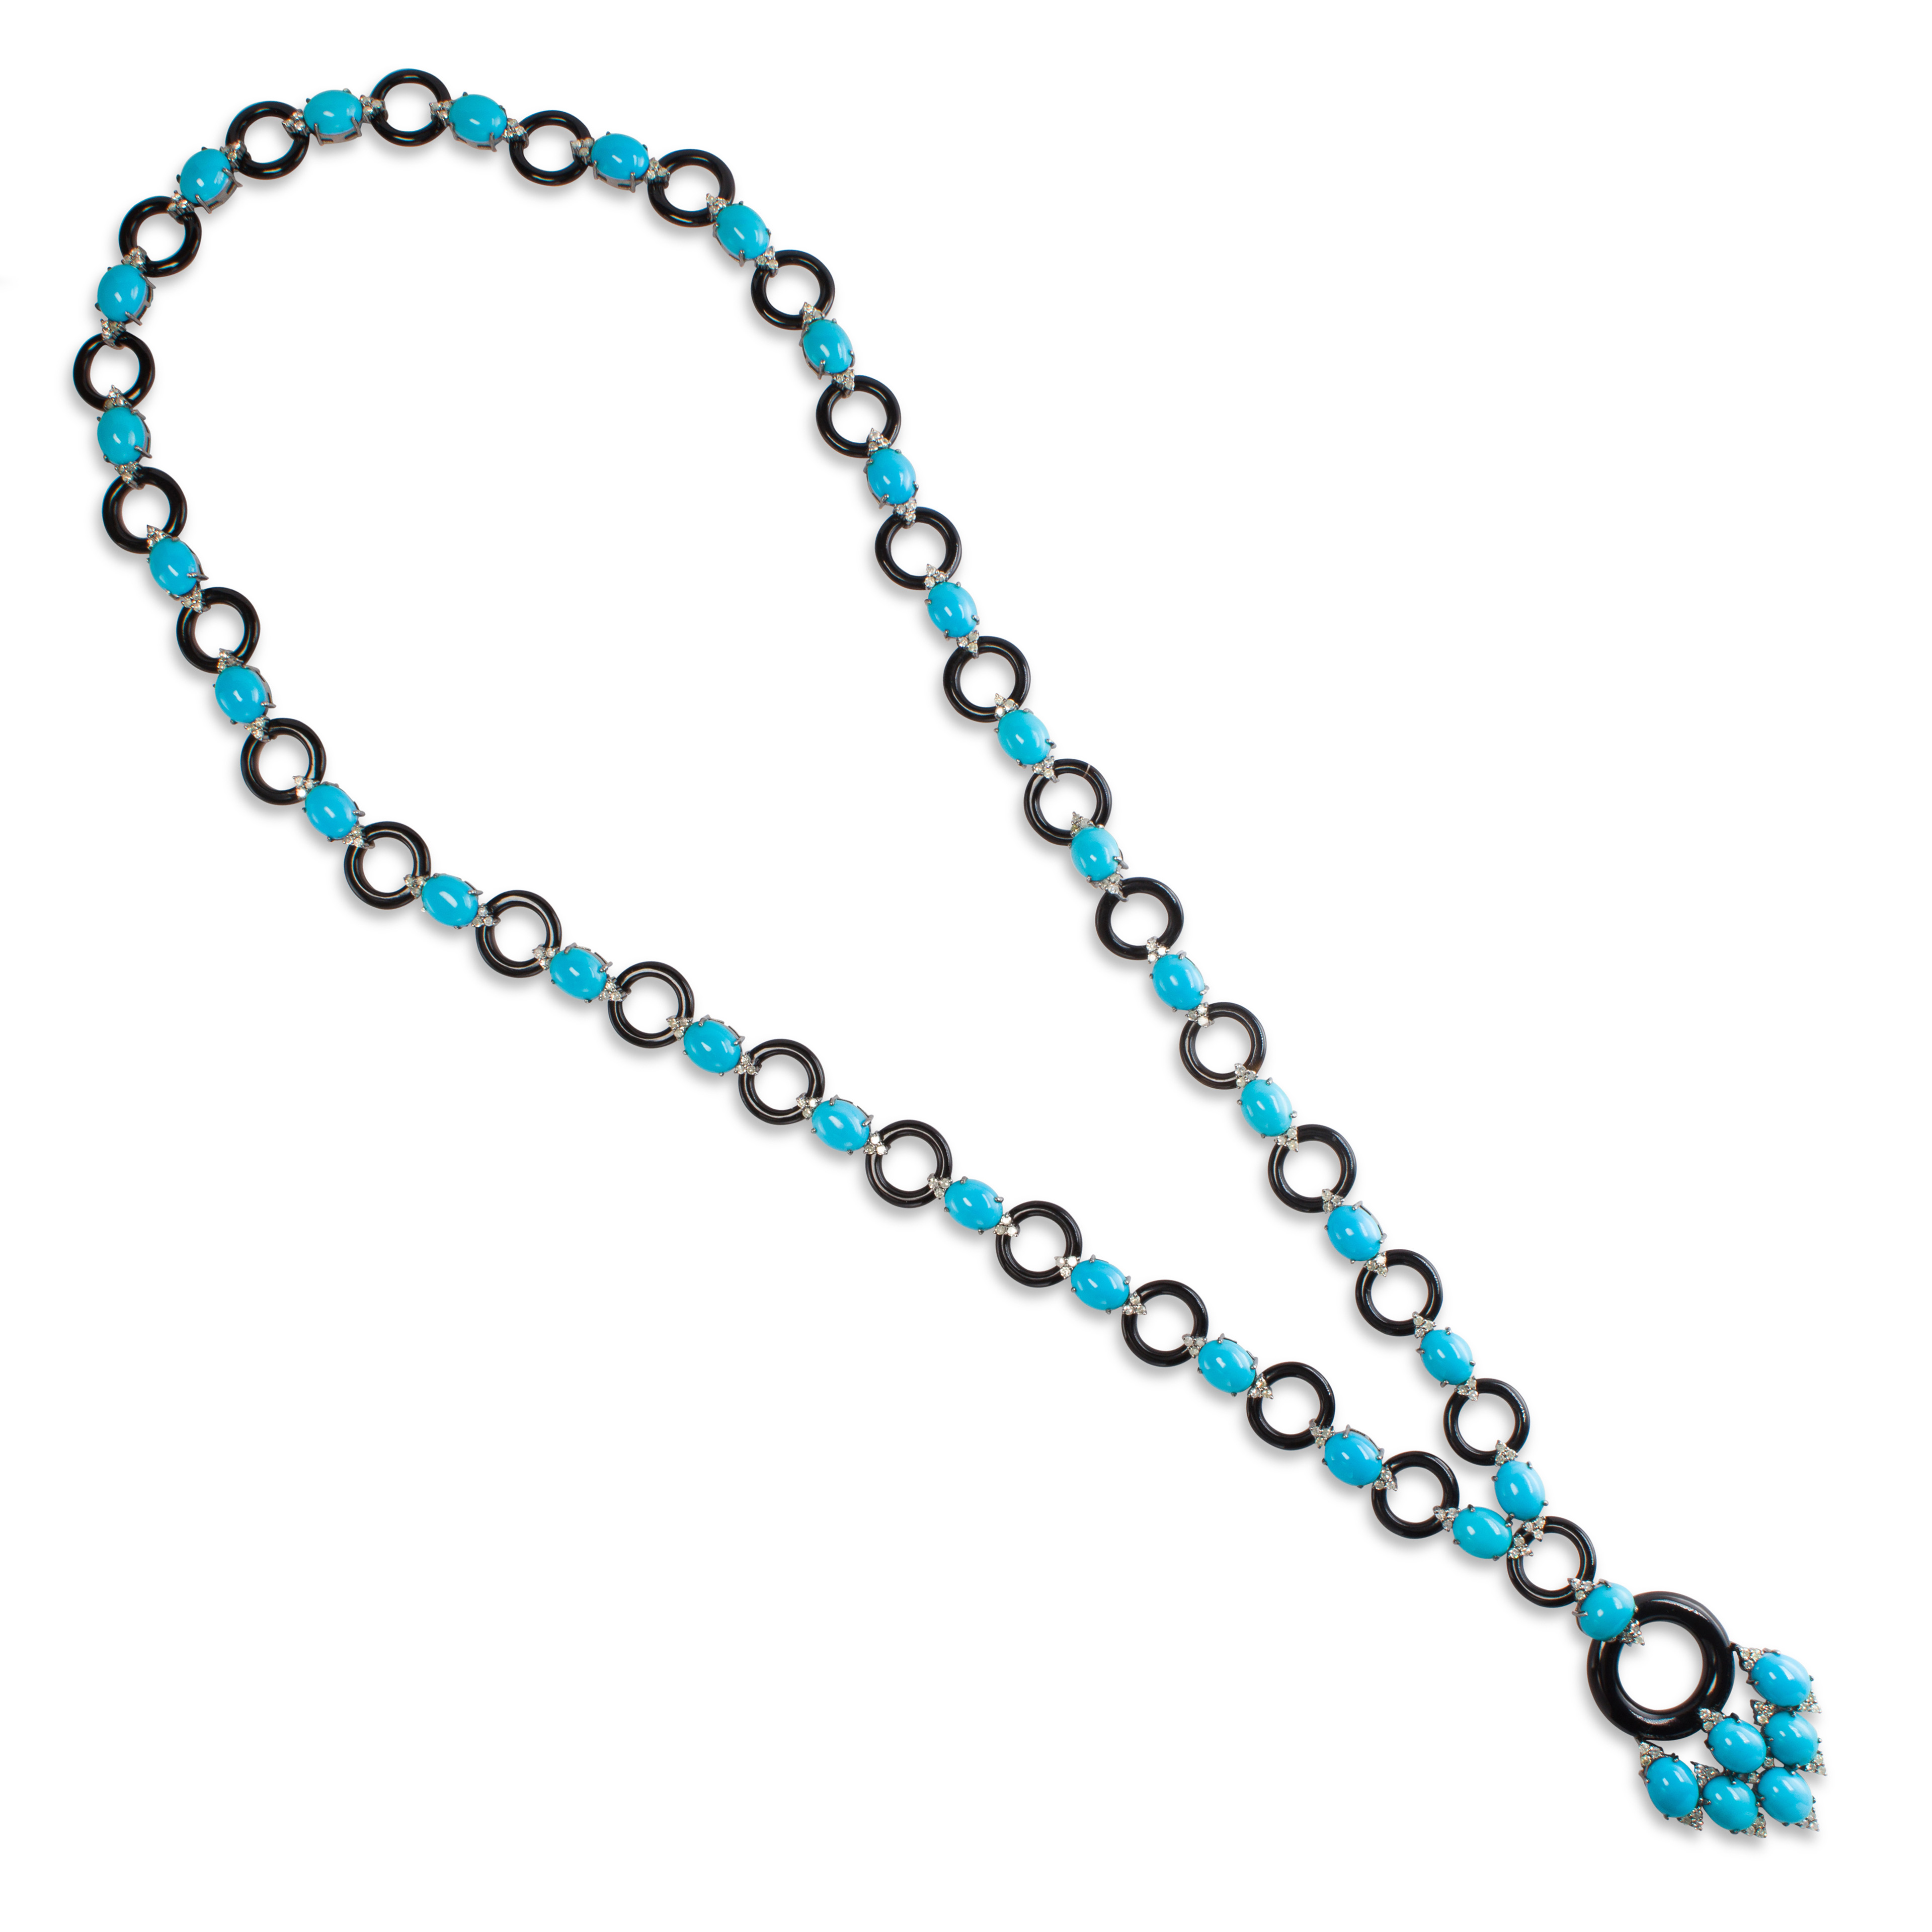 A TURQUOISE BLACK CHALCEDONY  3a63a5